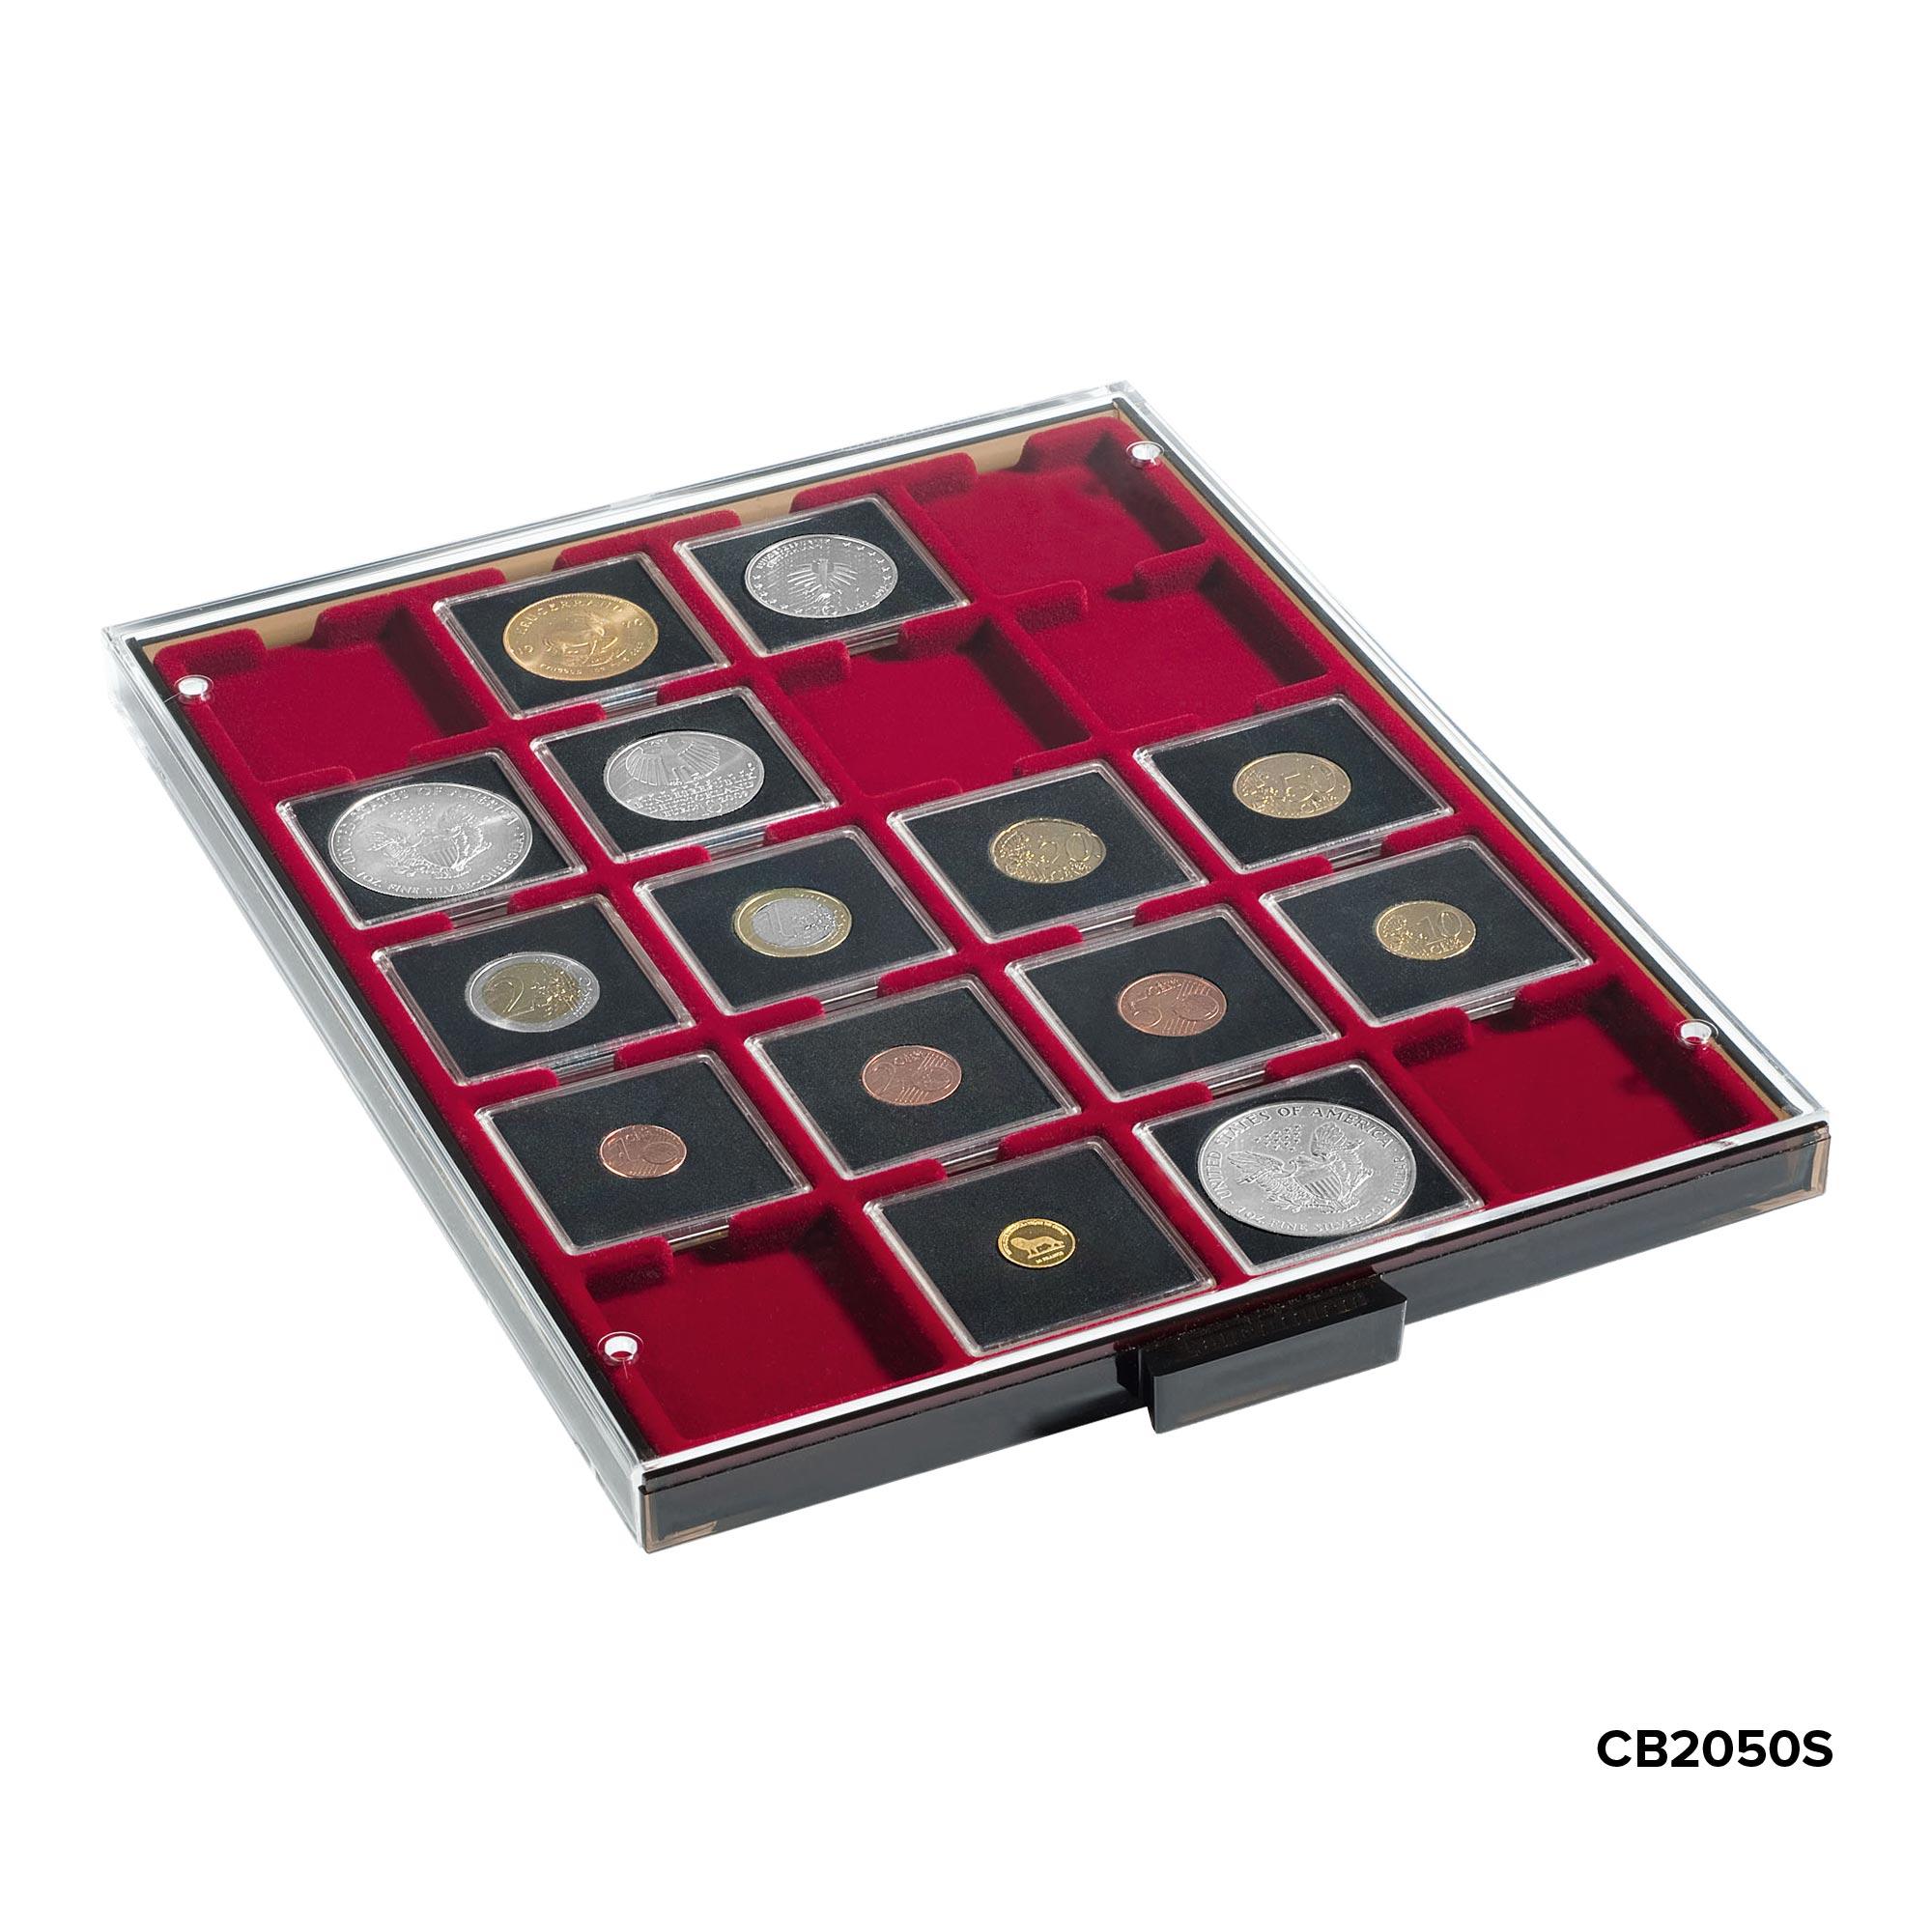 Stackable Coin Drawer 20 Coins up to 50mm - Smoke, Black Lining